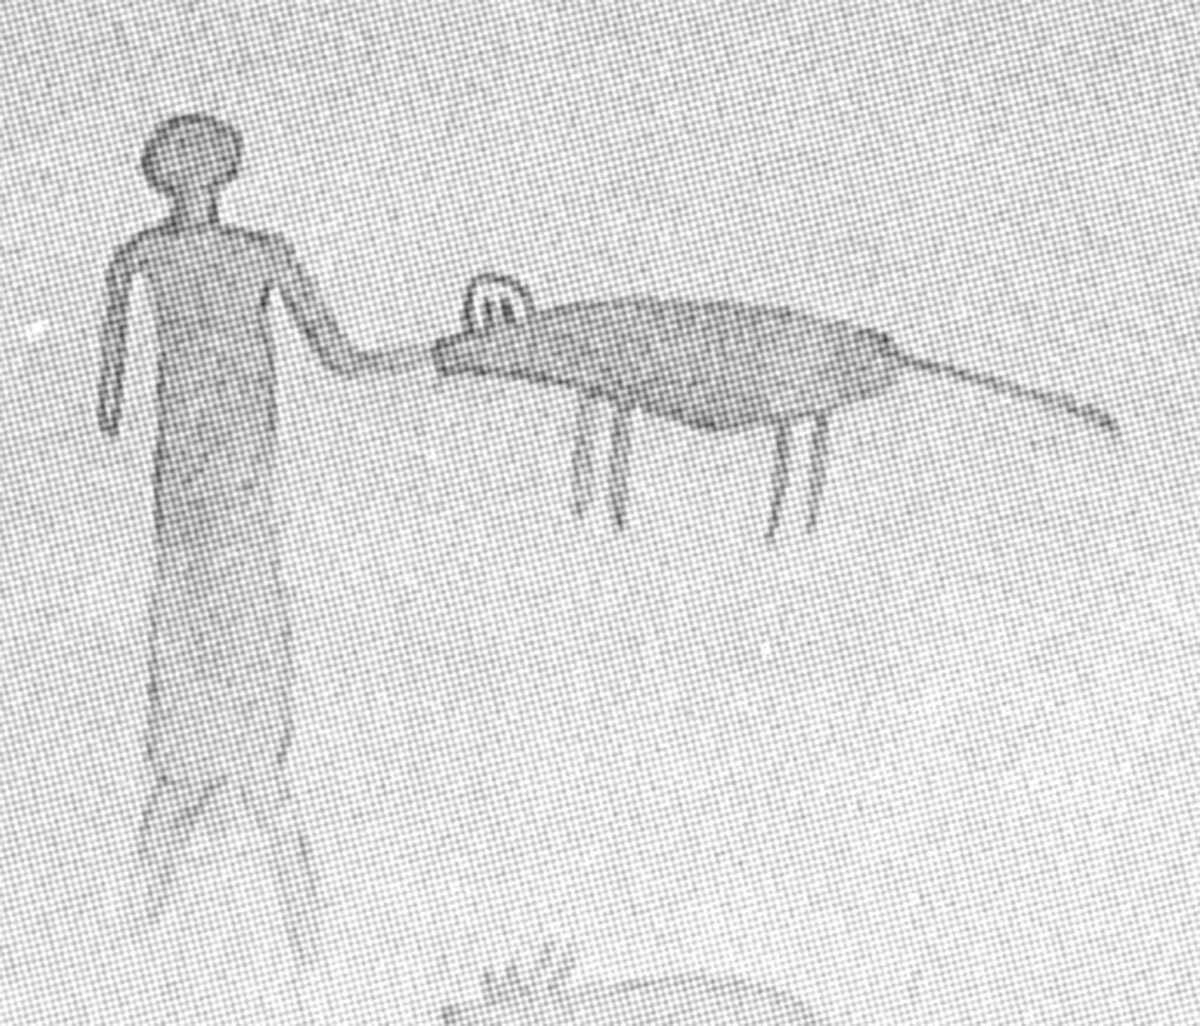 A Red Monochrome anthropomorph adjacent to a quadruped (Figure T) as illustrated by Kirkland.